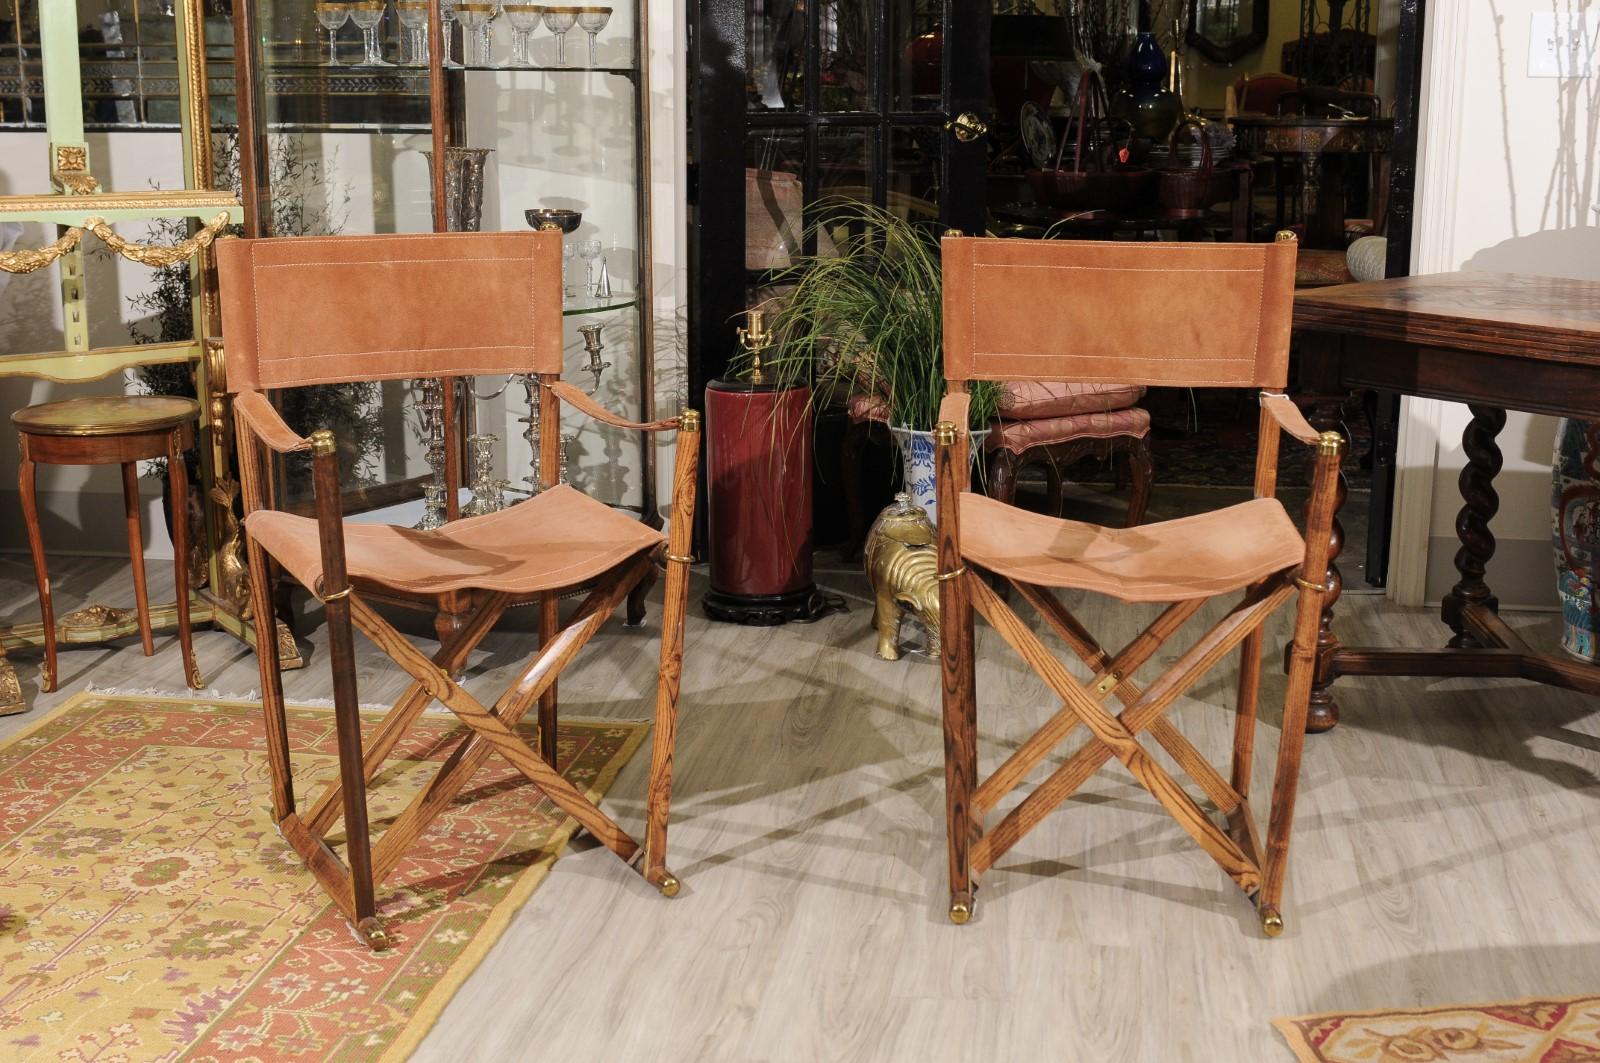 The set of campaign / director armchairs are made by Valenti, a company which started in Barcelona in 1798. The frame is teak with tan suede seats and backs. Solid brass trim
The fact that they fold makes it convenient if you don't want to use them